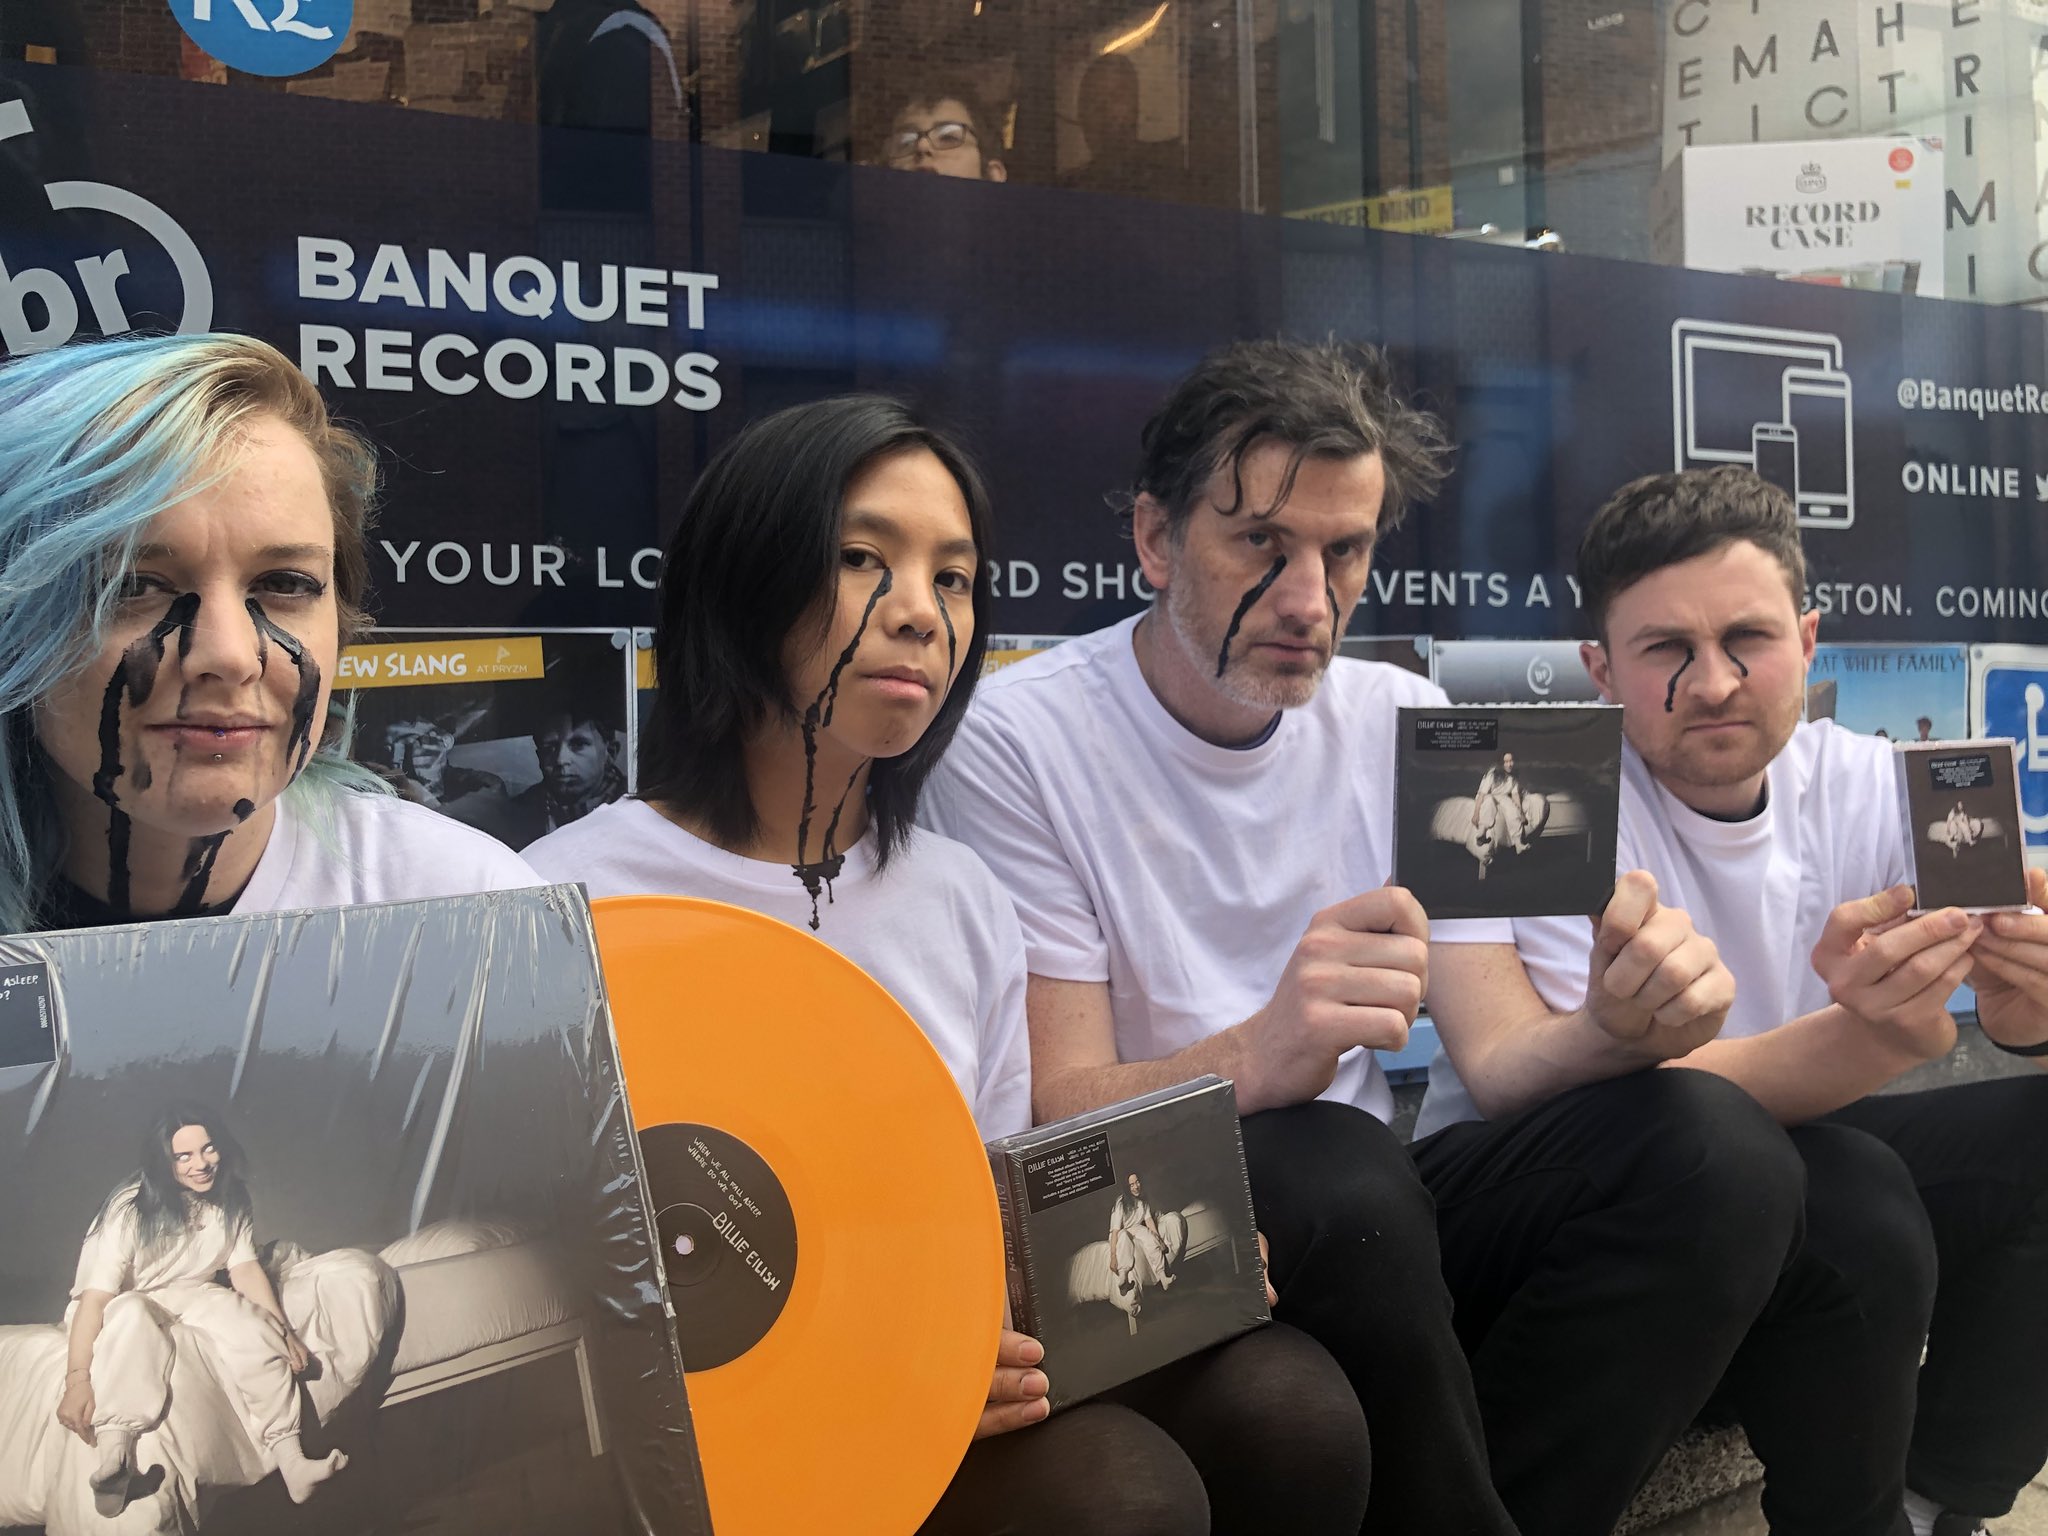 Med andre ord Til Ni parfume Banquet Records on Twitter: "Billie Eilish - When We All Fall Asleep, Where Do  We Go? https://t.co/KCrIXoG8QC two vinyl colourways including this  exclusive for the UK orange variant /2000 | cd 